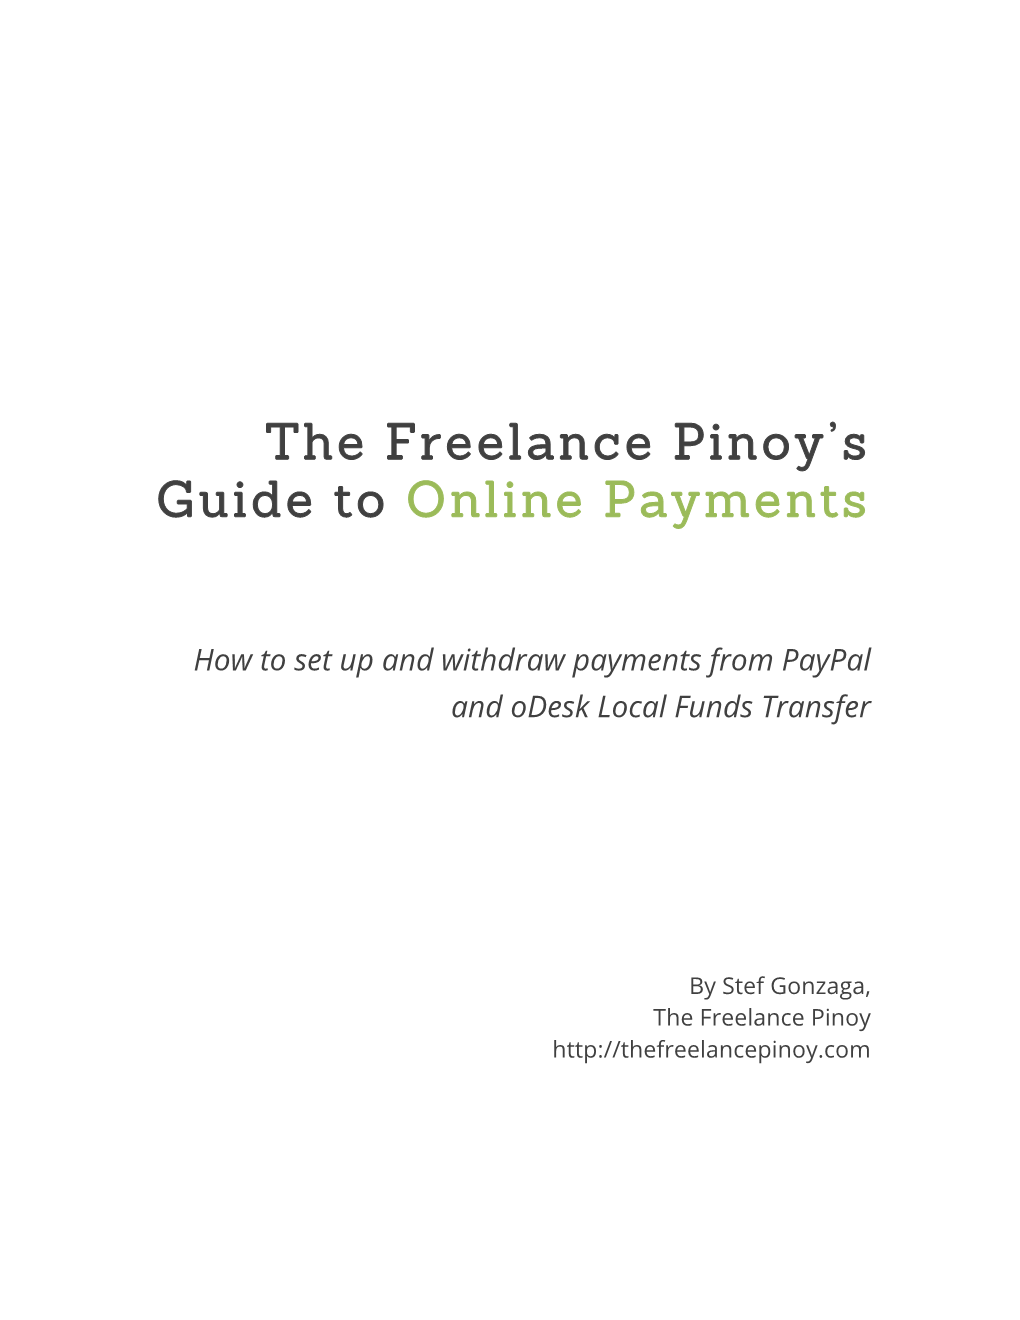 The Freelance Pinoy's Guide to Online Payments